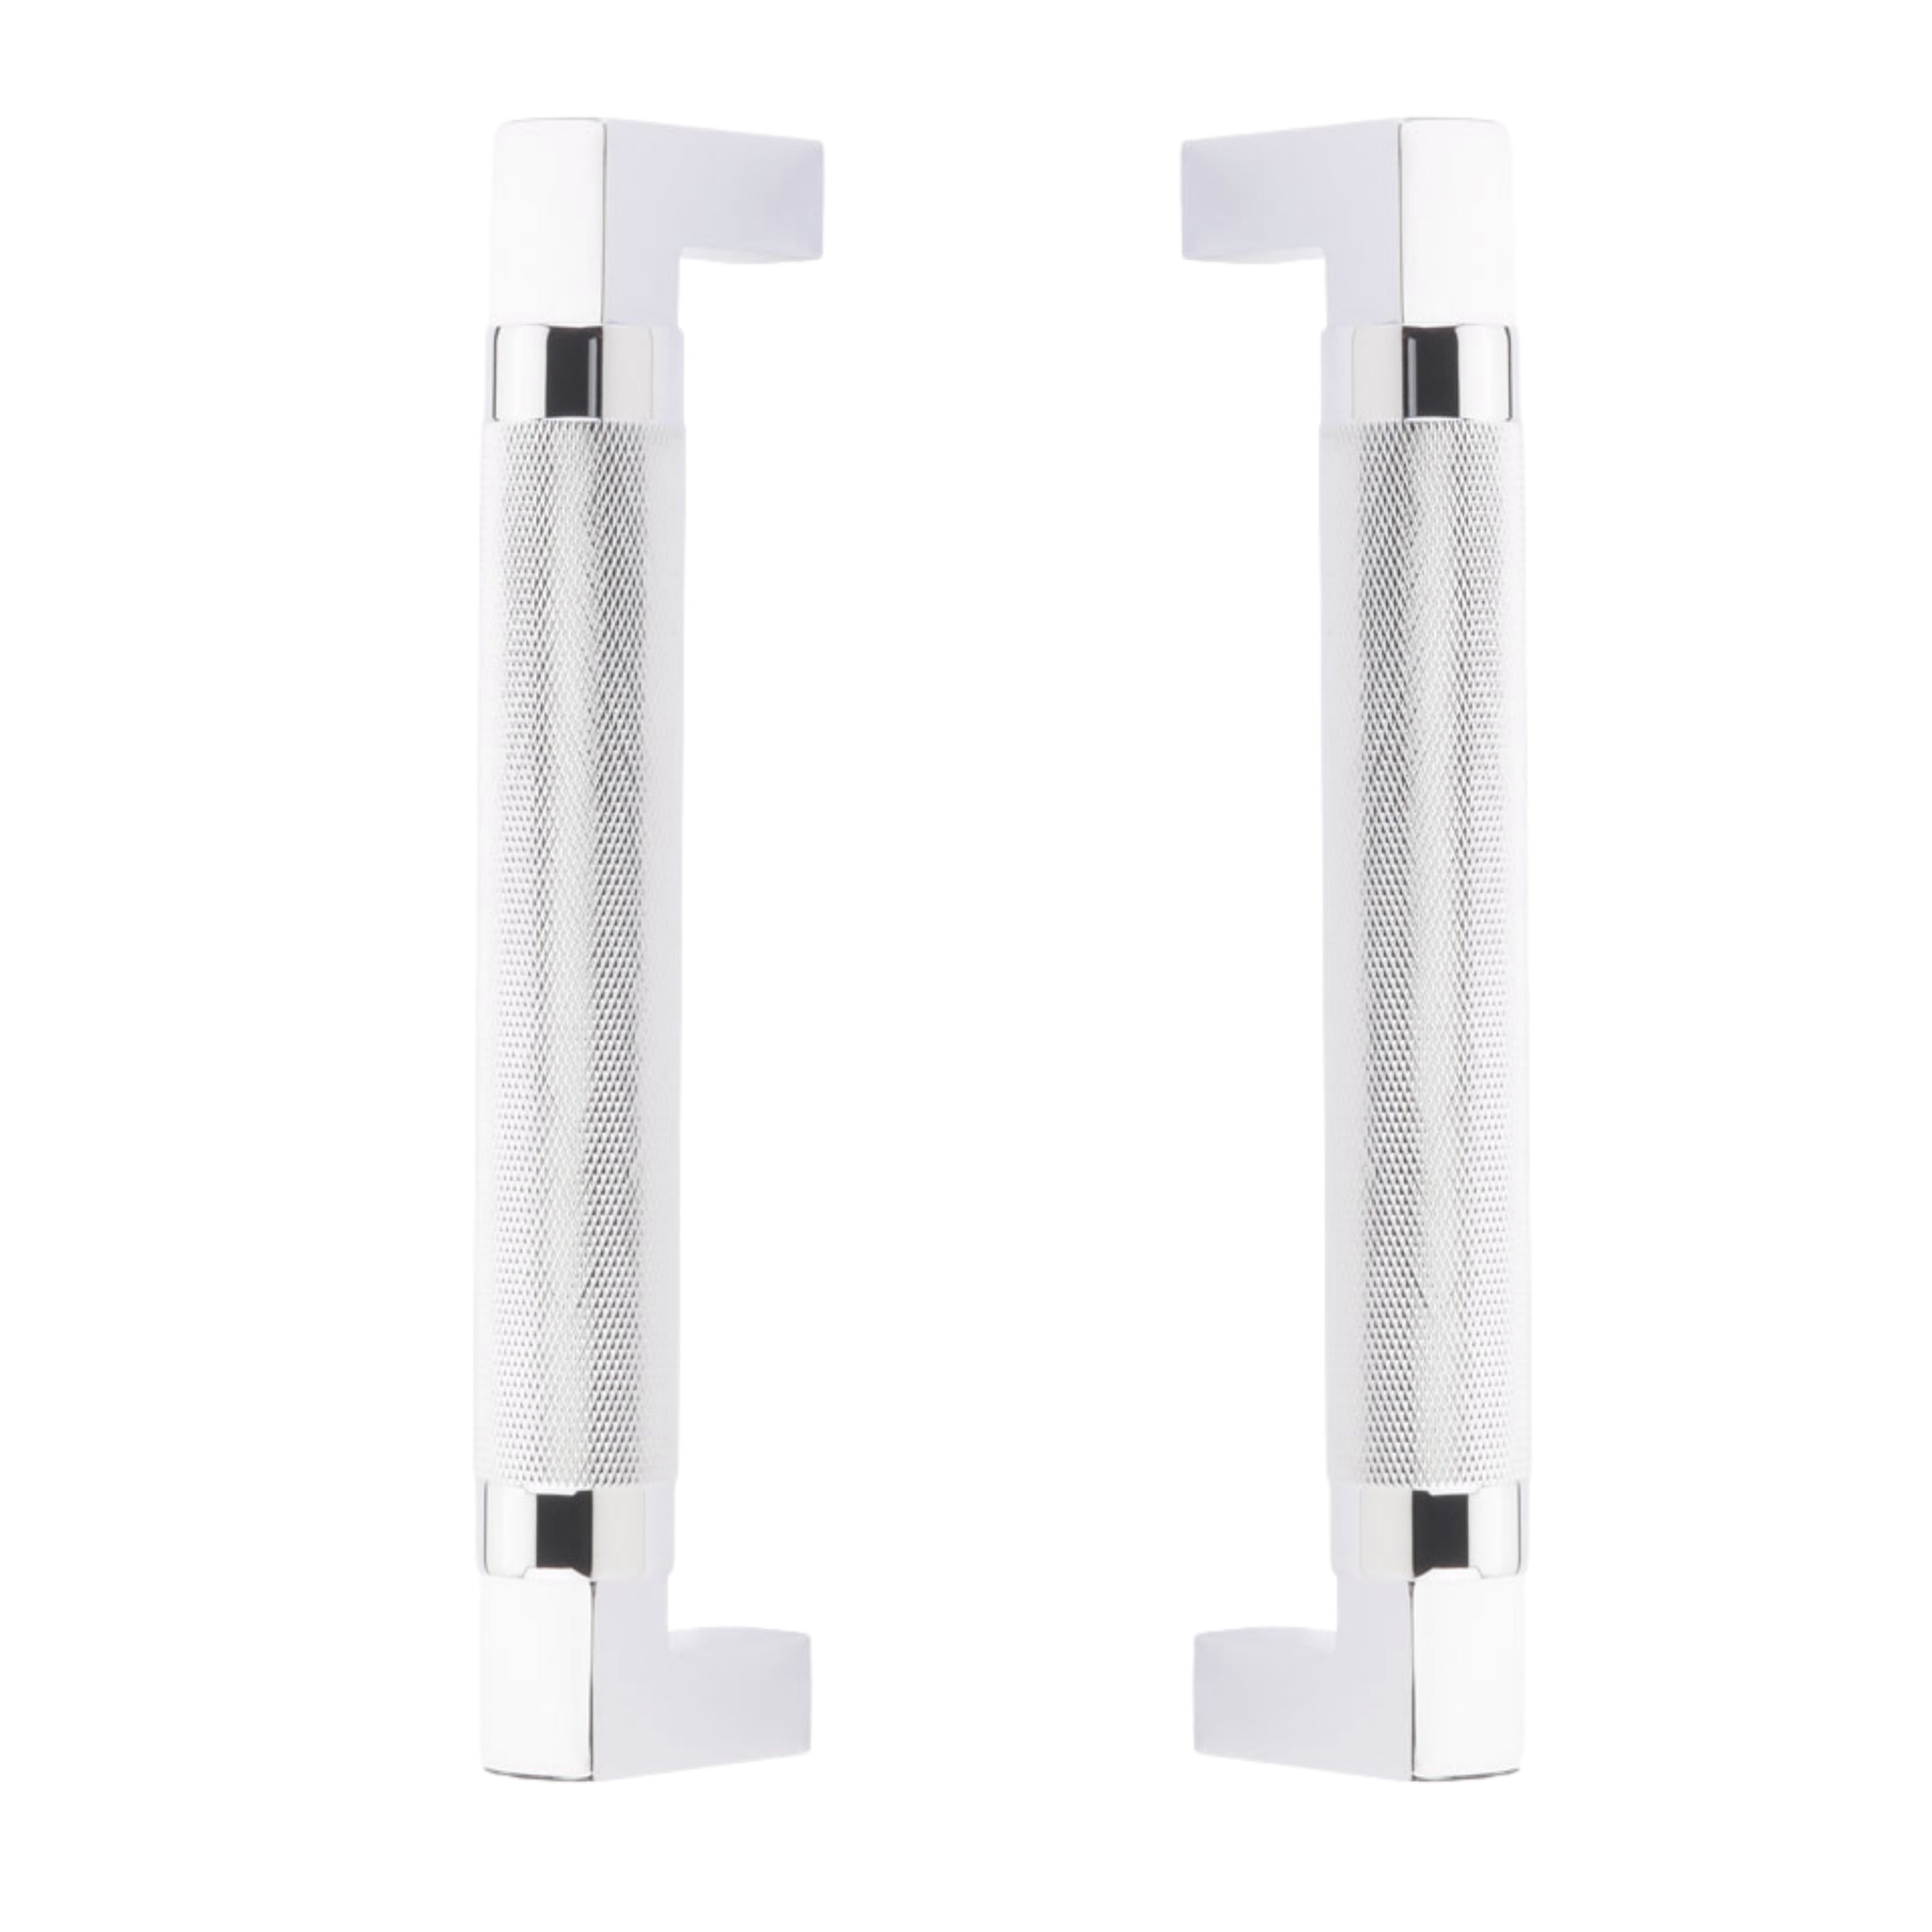 Back to Back "Helix" Door Pull in Polished Chrome Hardware for Interior Sliding and Barn Doors - Industry Hardware